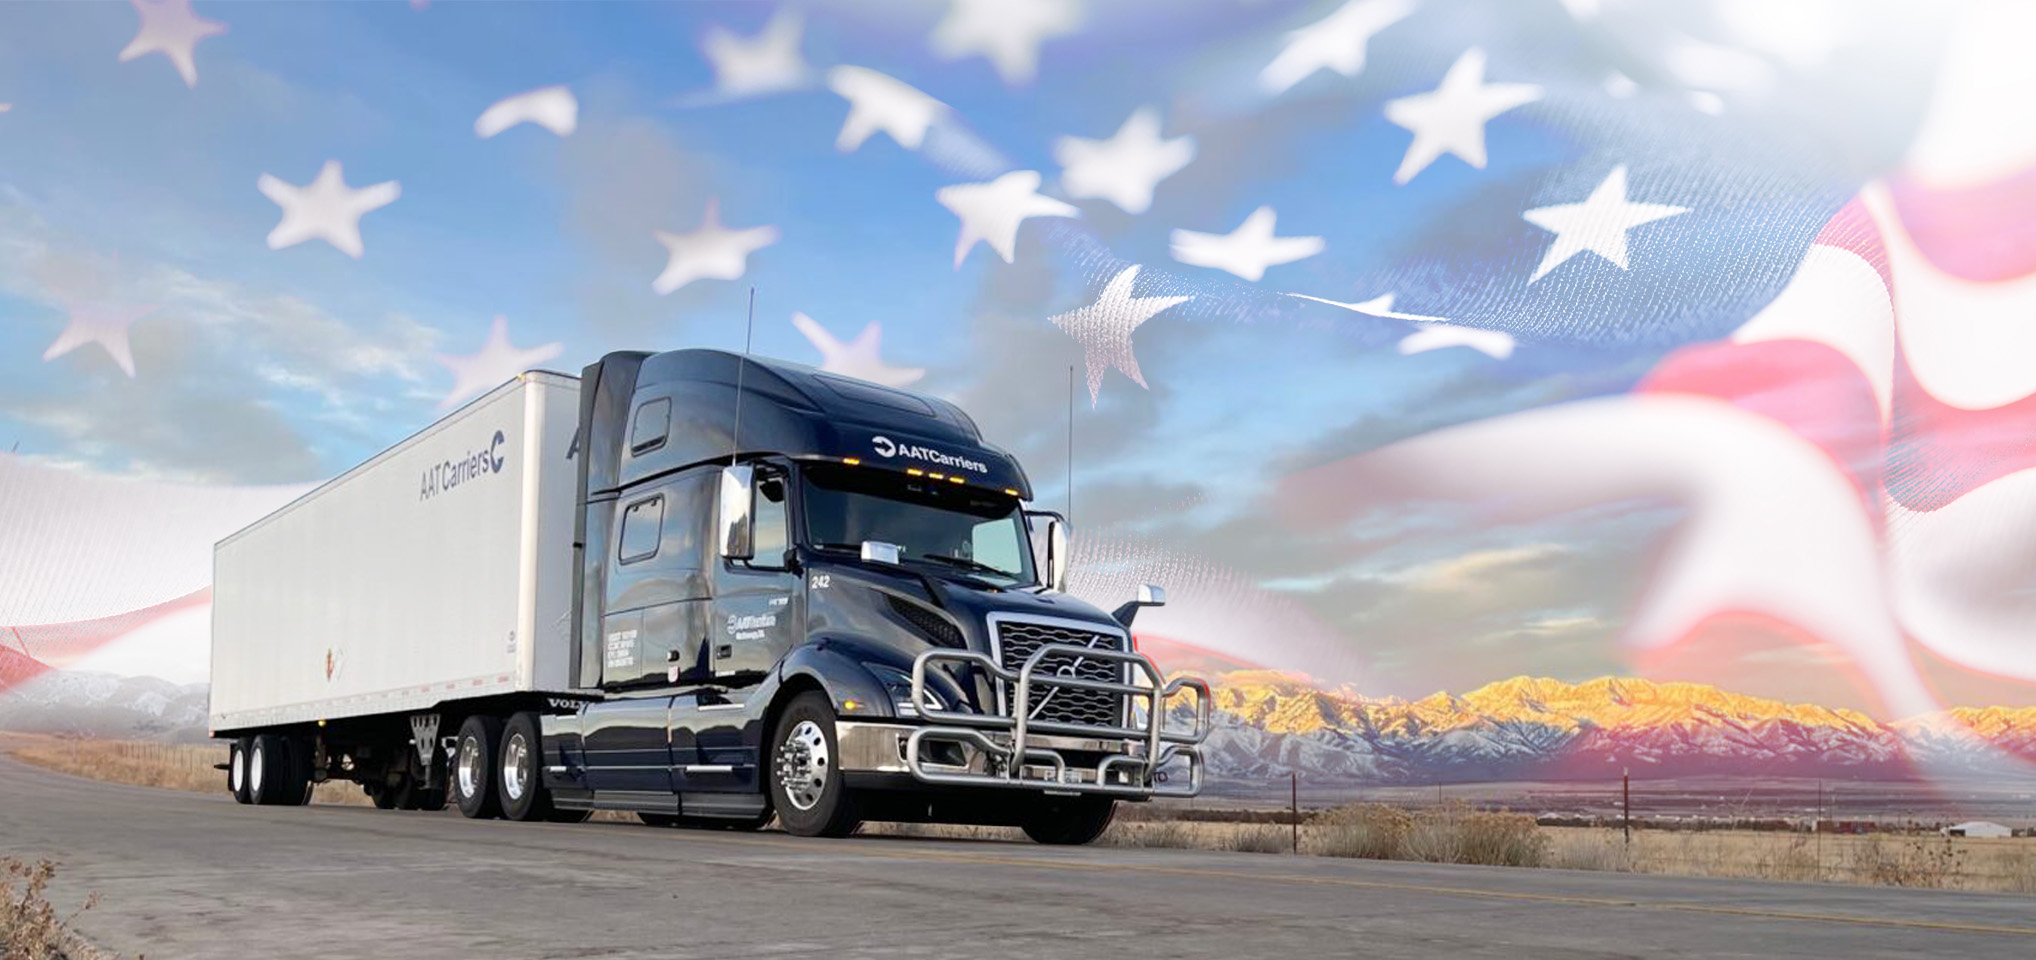 AAT Carrier truck on road, american flag superimposed on horizon